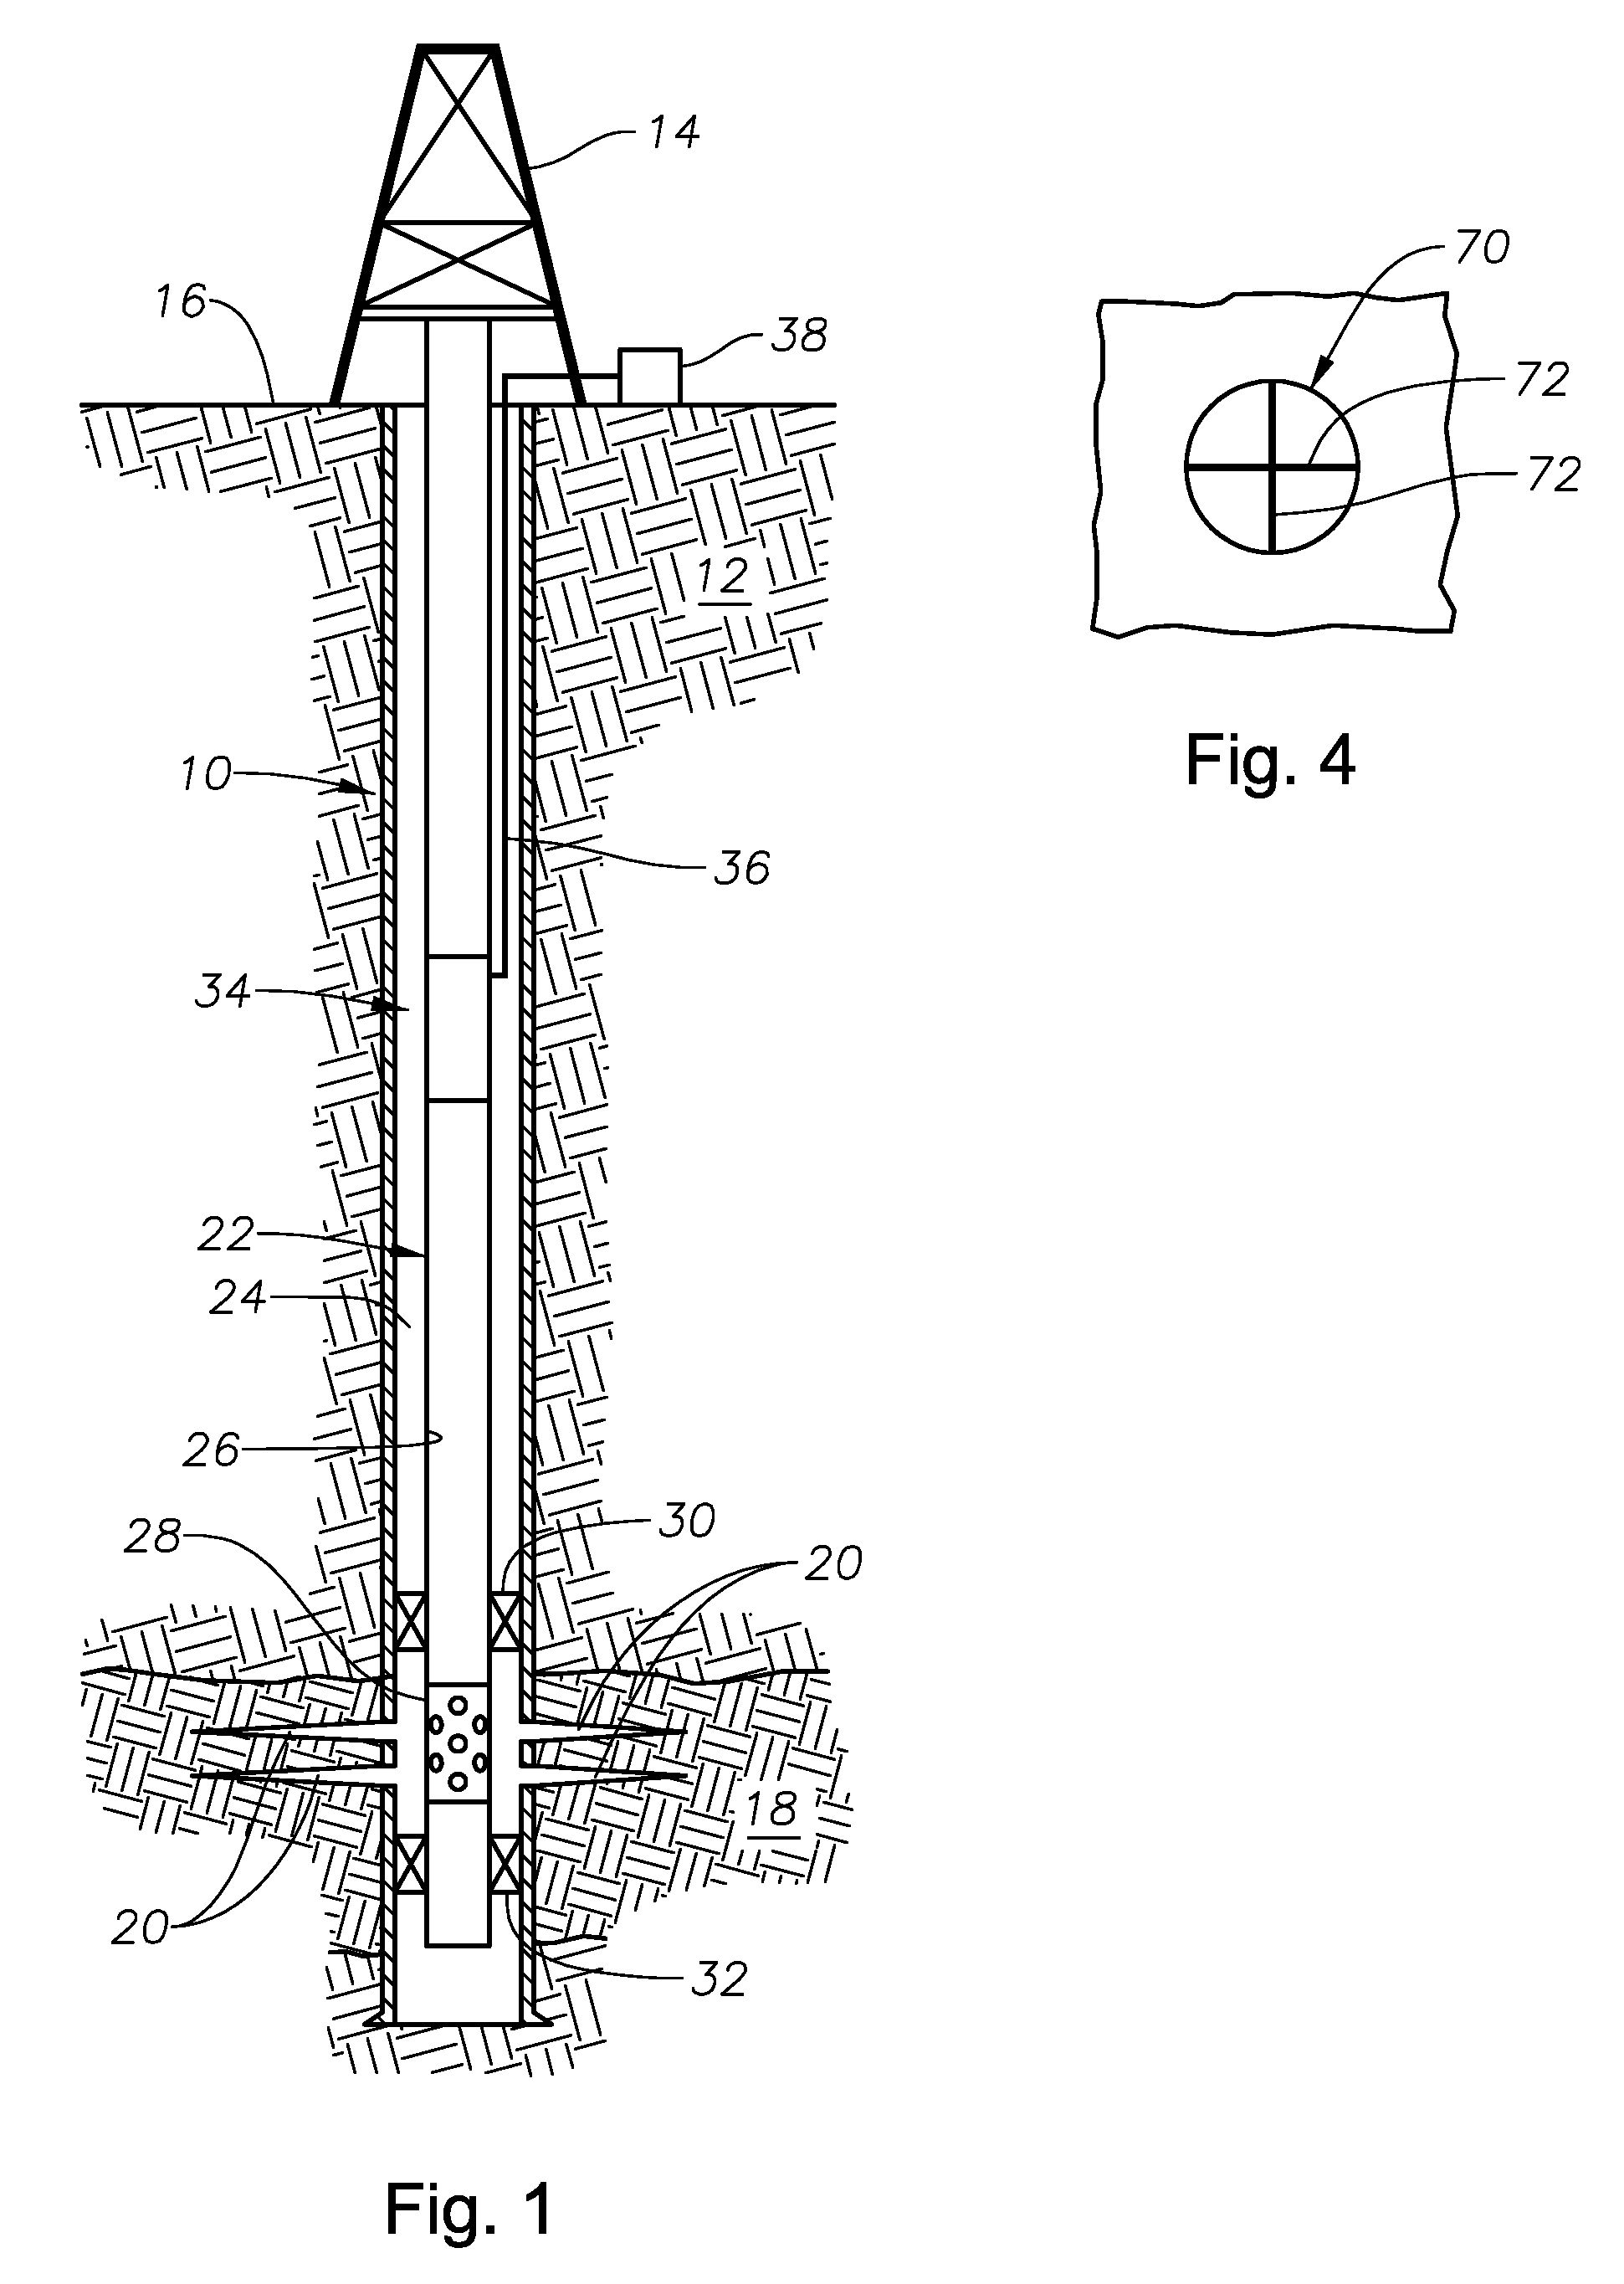 Methods for Preventing Mineral Scale Buildup in Subsurface Safety Valves